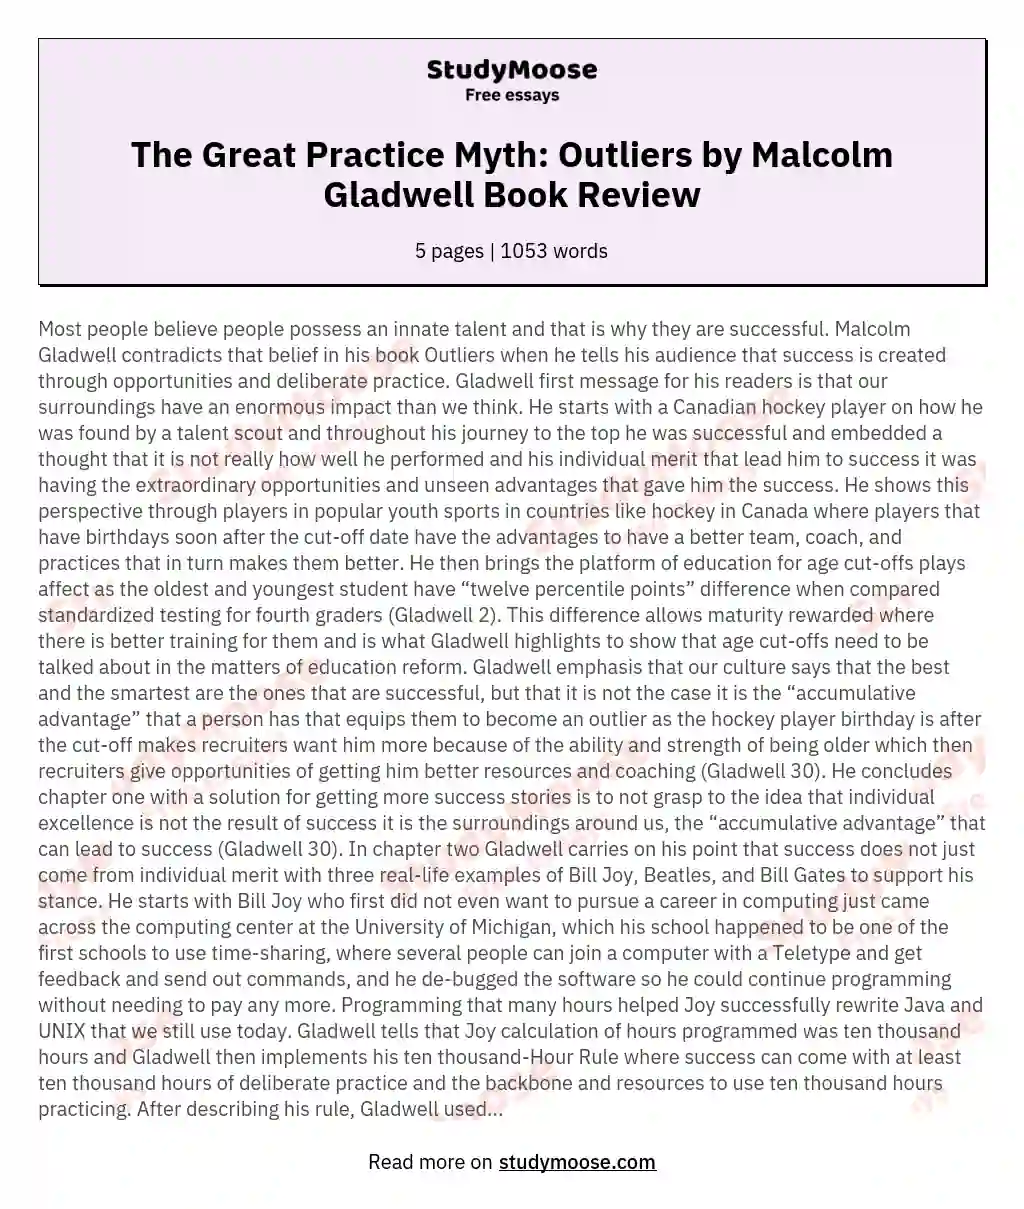 The Great Practice Myth: Outliers by Malcolm Gladwell Book Review essay